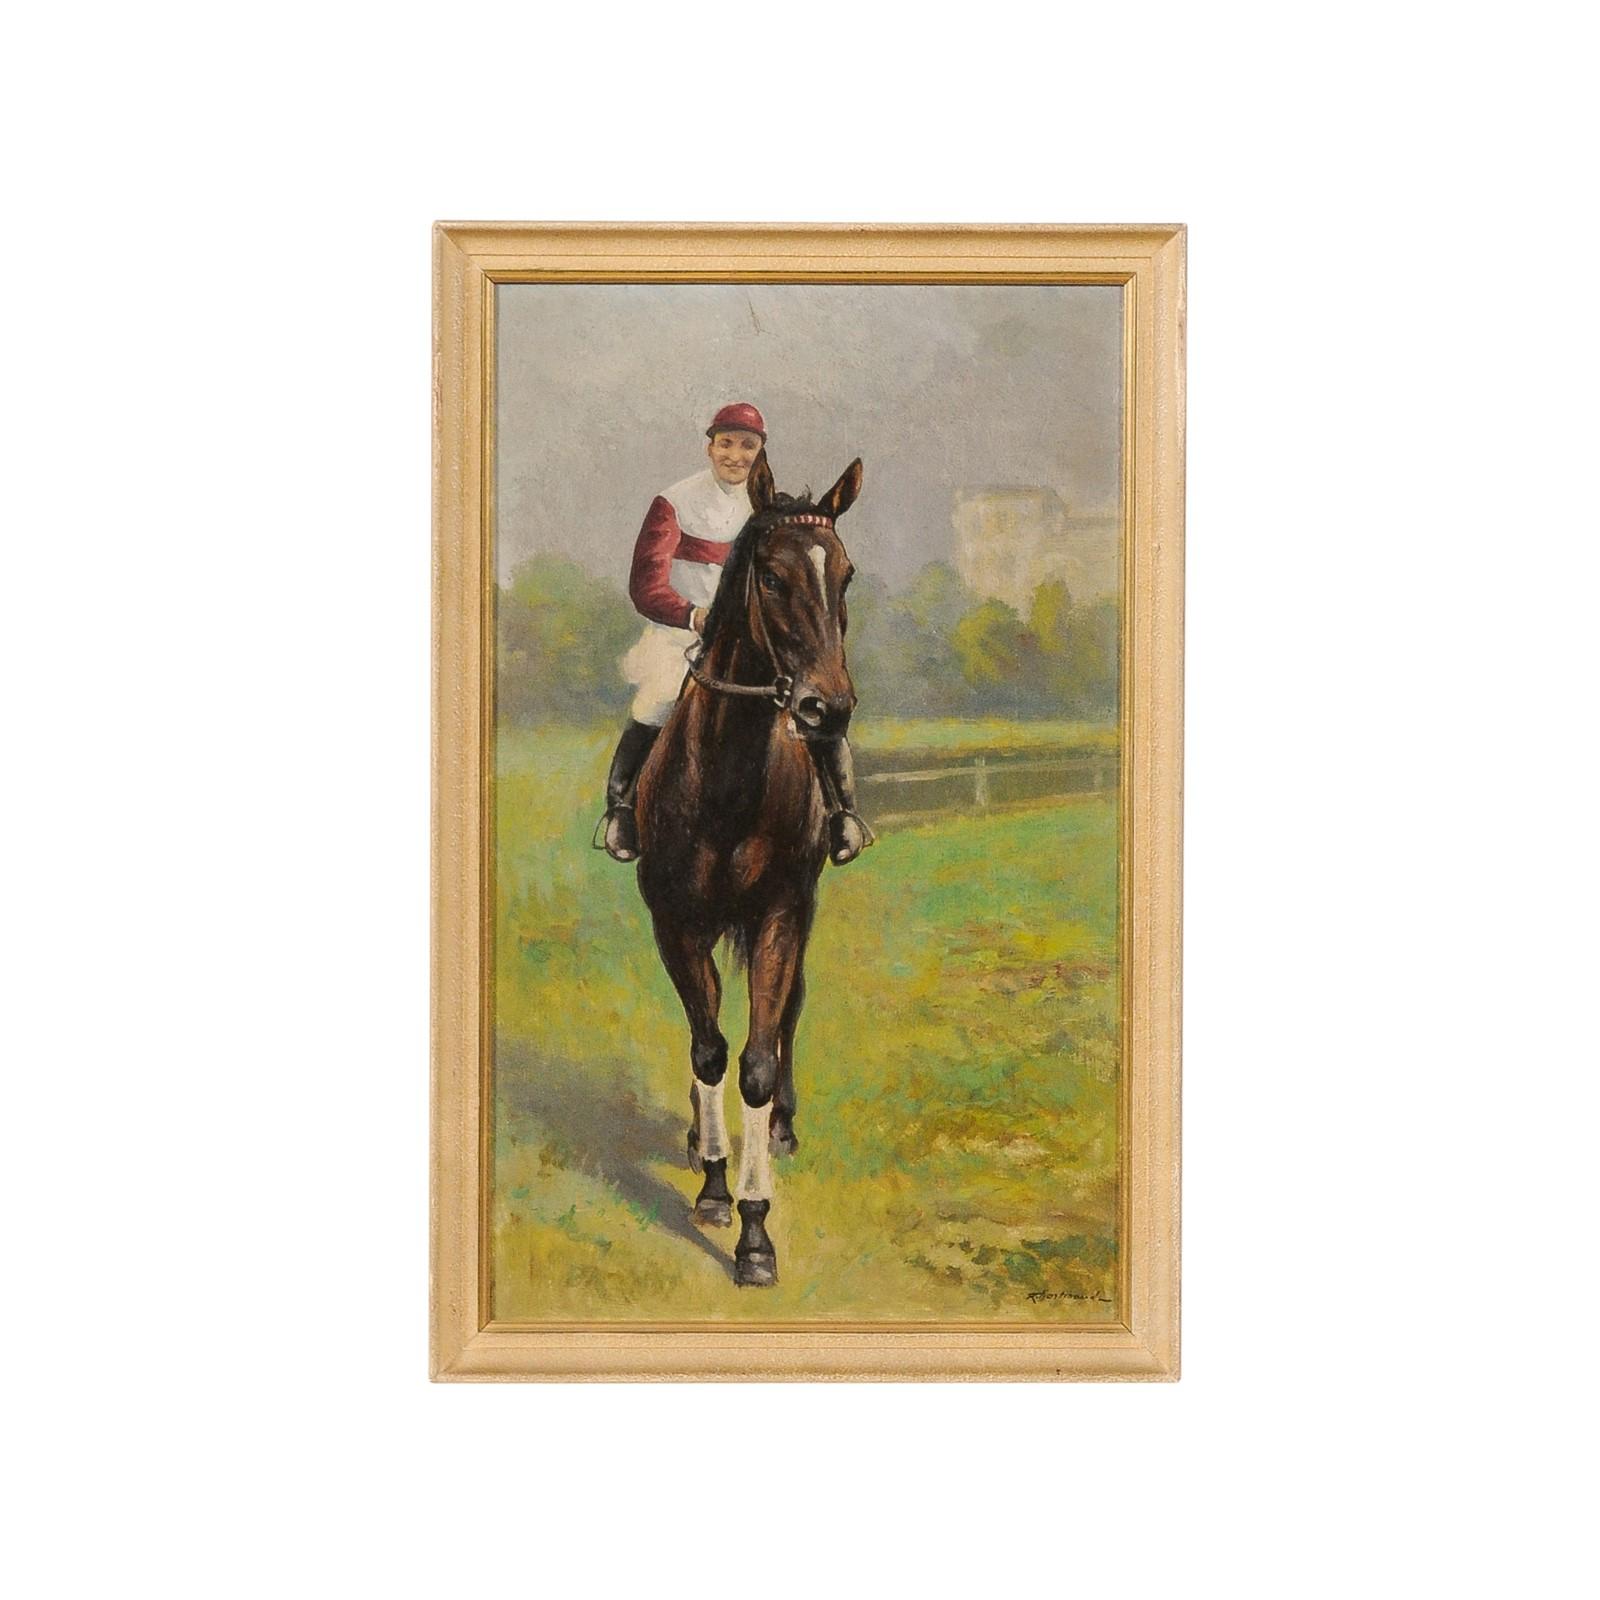 A French vertical framed painting from the early 20th century, depicting a horse and a jockey and signed lower right. Created in France during second quarter of the 20th century, this oil on old wooden fiberboard painting depicts a smiling jockey